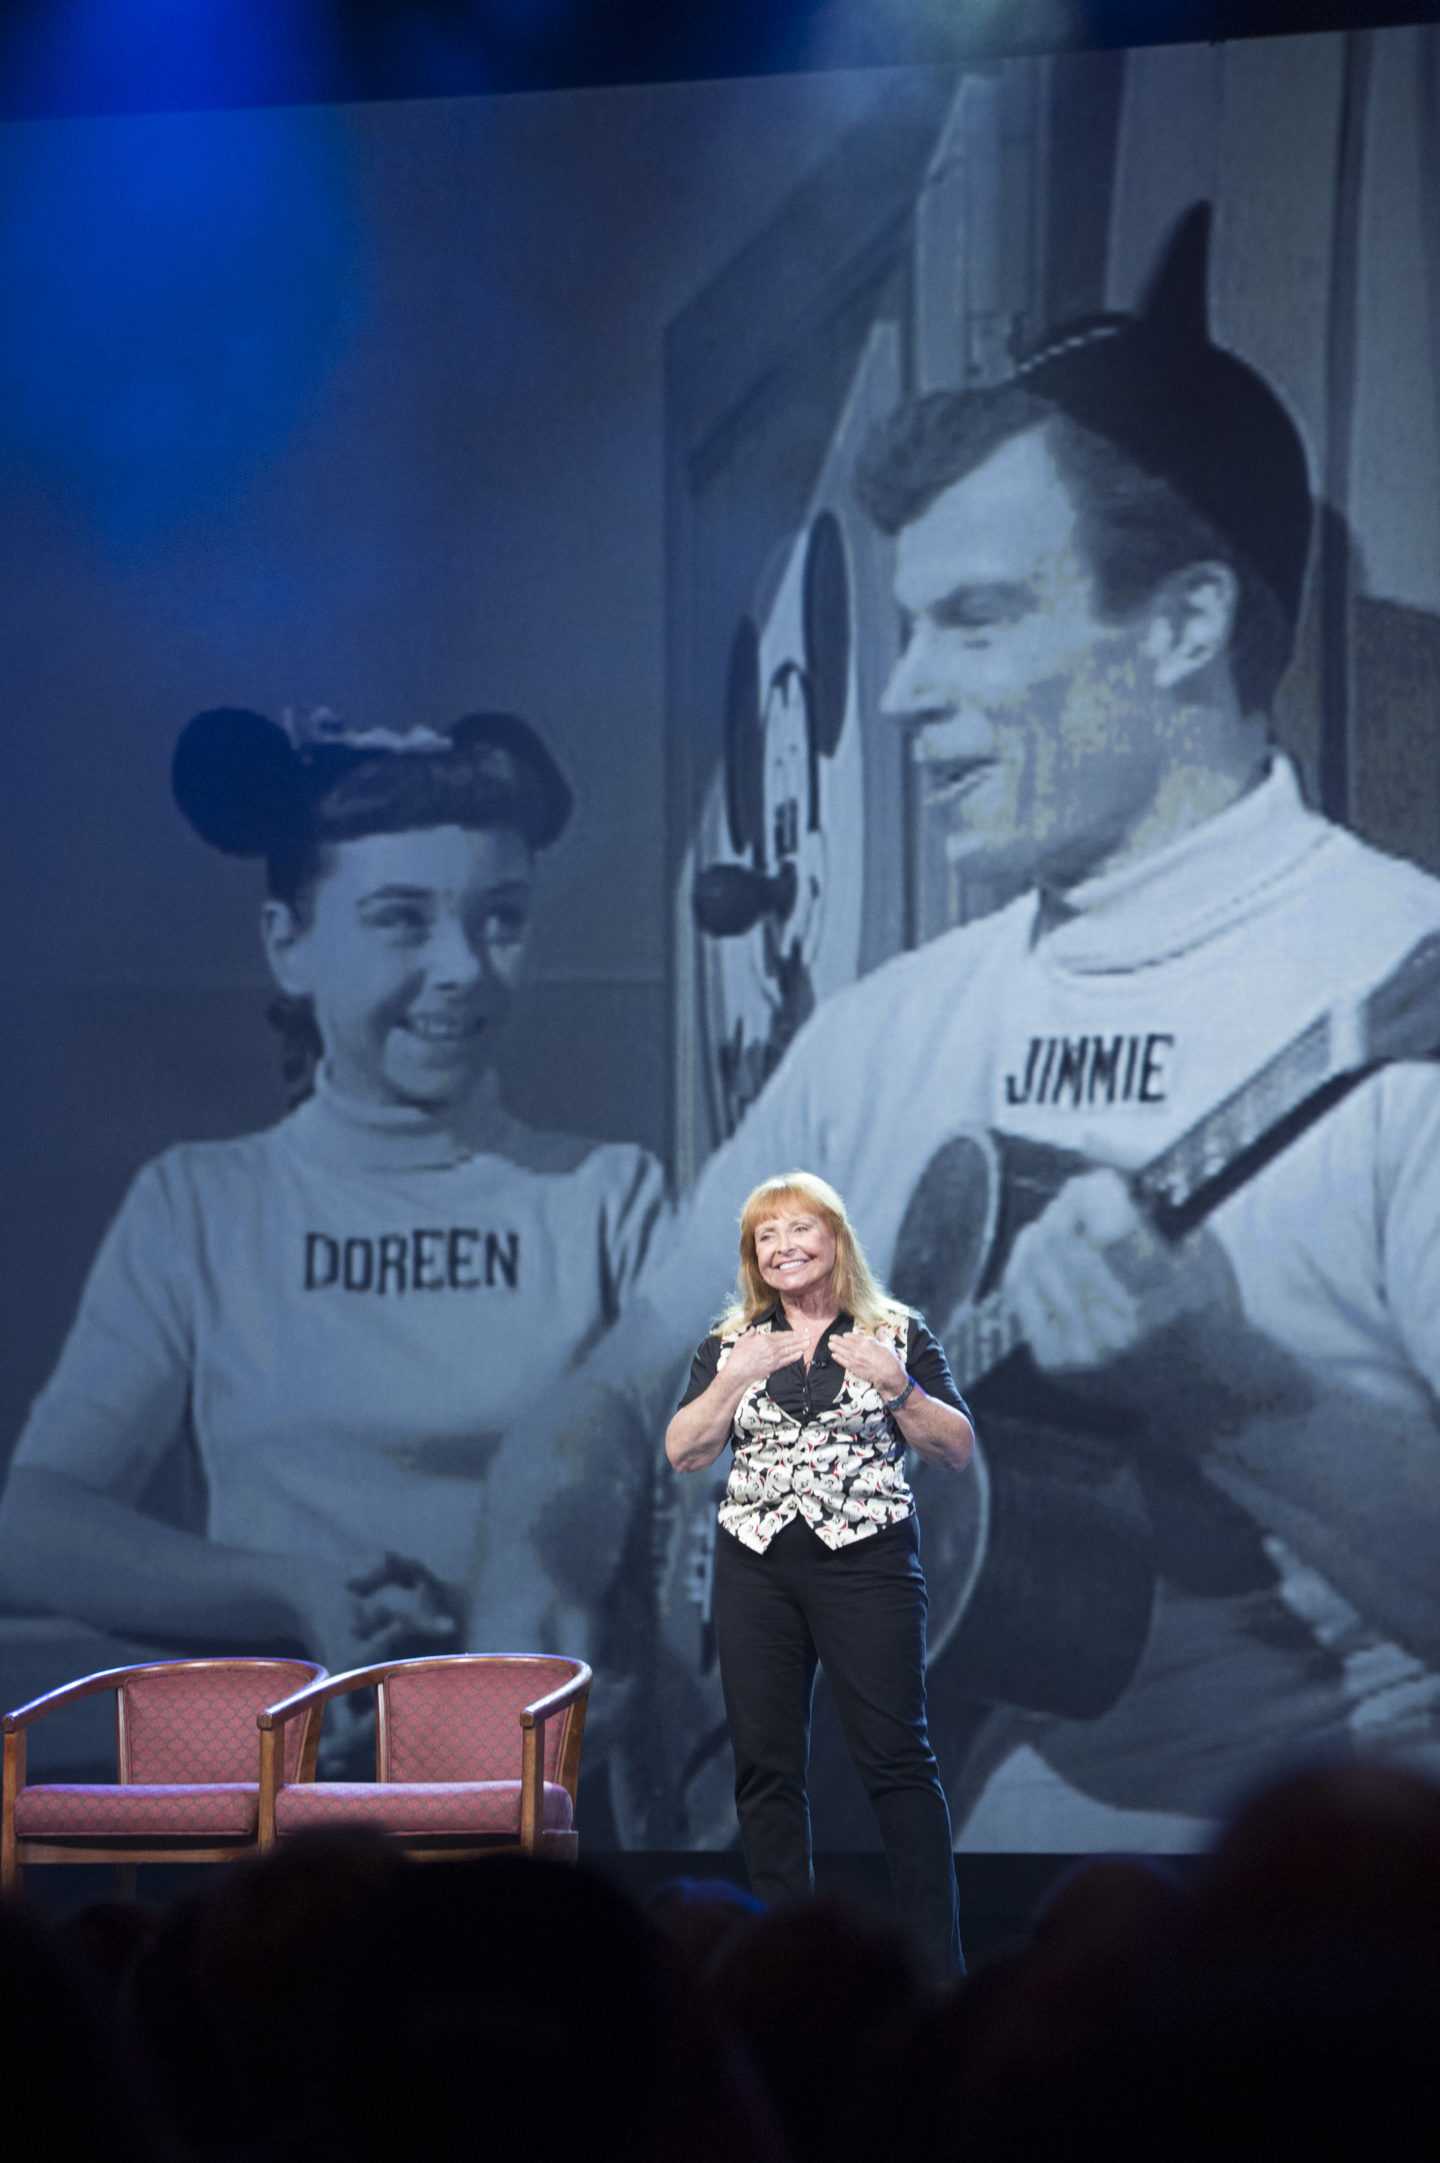 Original Mouseketeer Doreen Tracey Dies At 74 The Walt Disney Company